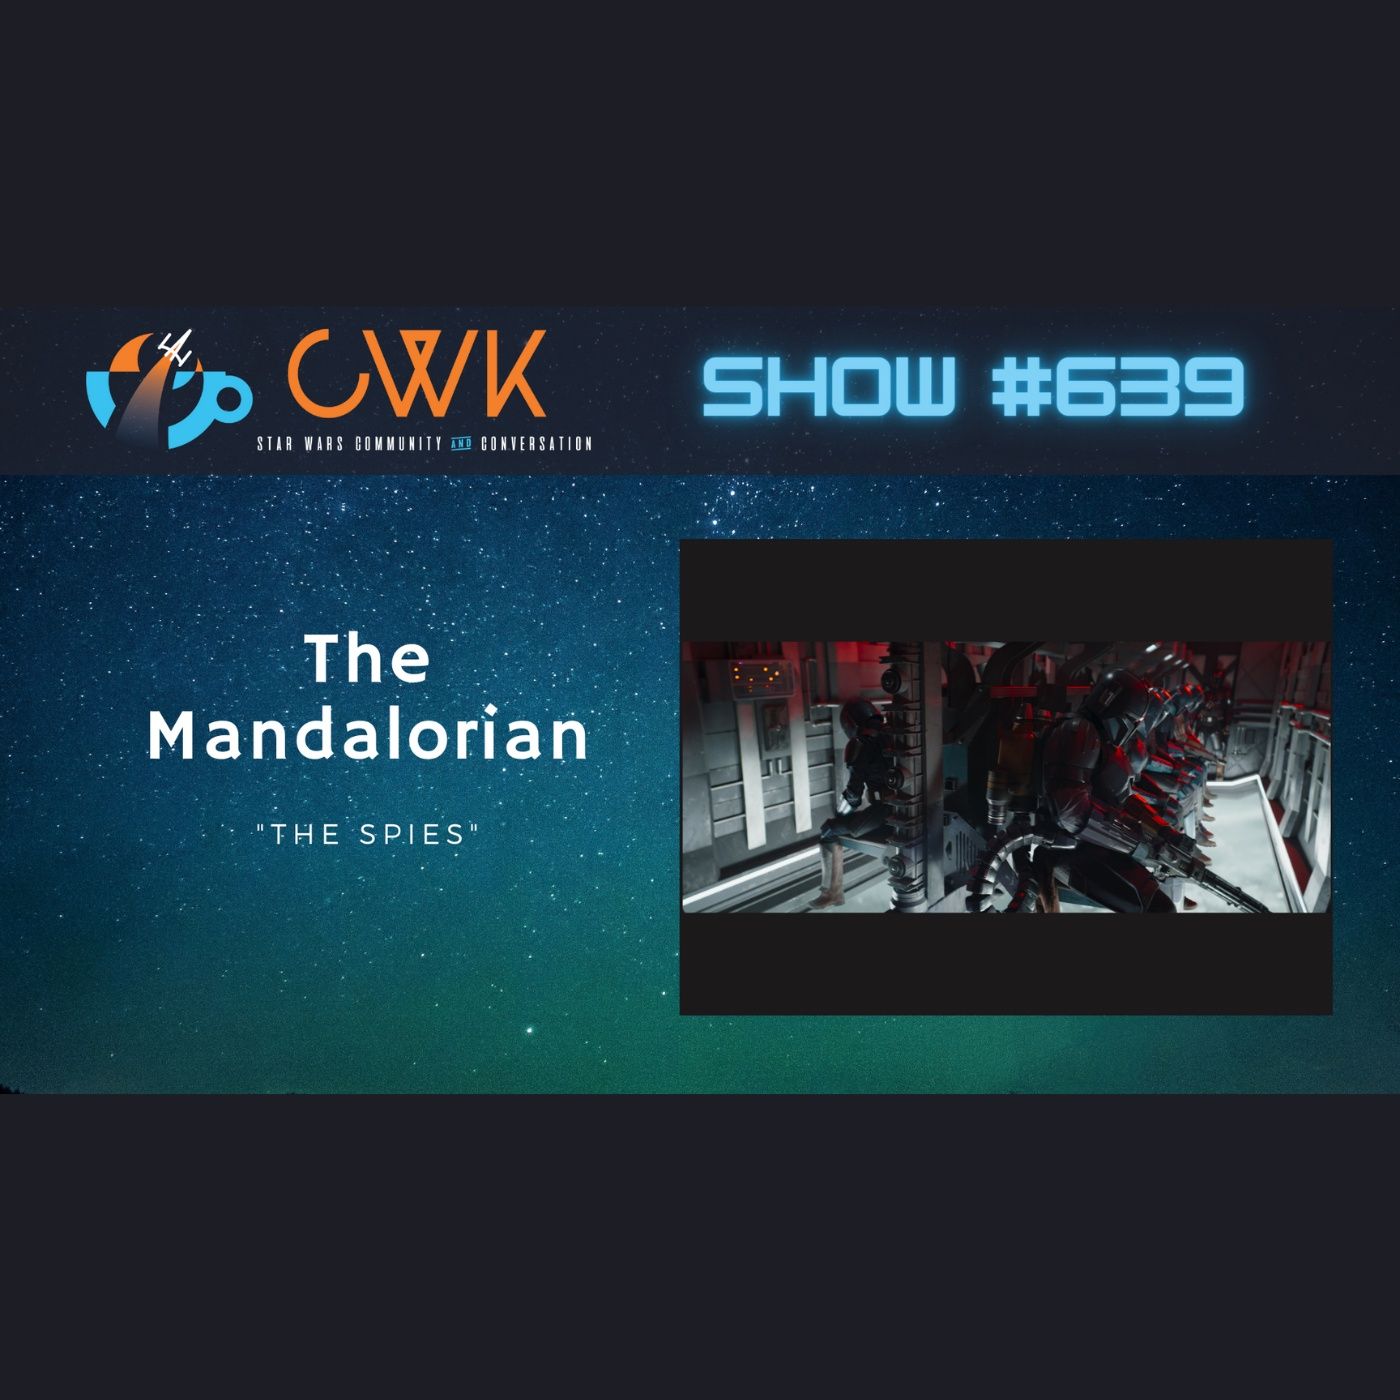 CWK Show #639: The Mandalorian- ”The Spies”